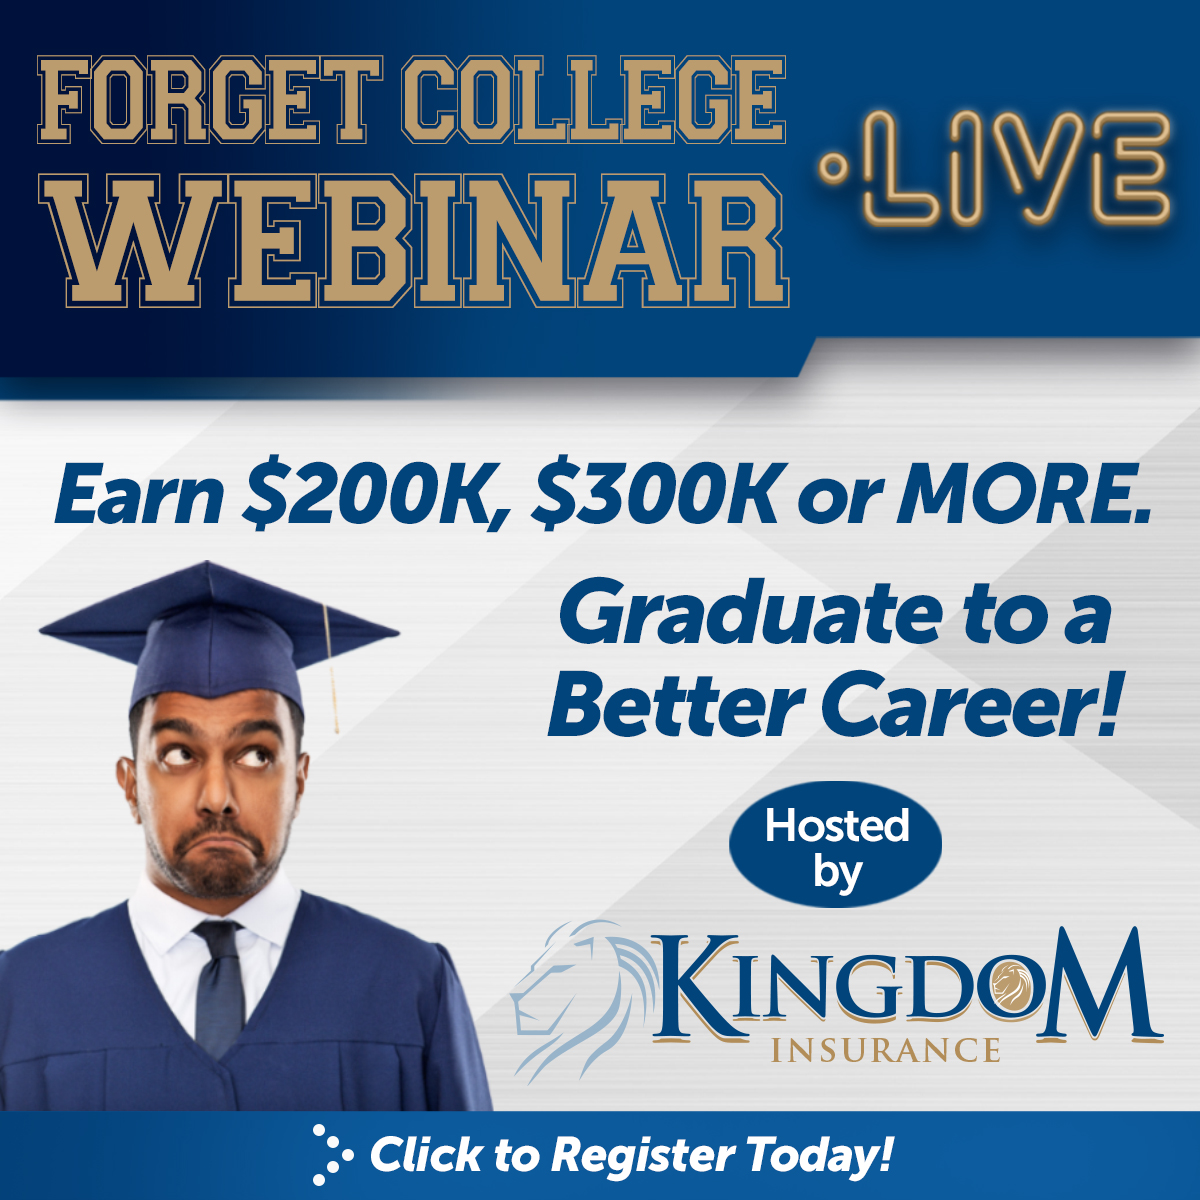 Forget College Webinar LIVE! Earn $200, $300, or more per year. Graduate to a Better Career! Hosted by Kingdom Insurance. June 21, and July 12 and July 26 at 11 a.m. Click to Register.